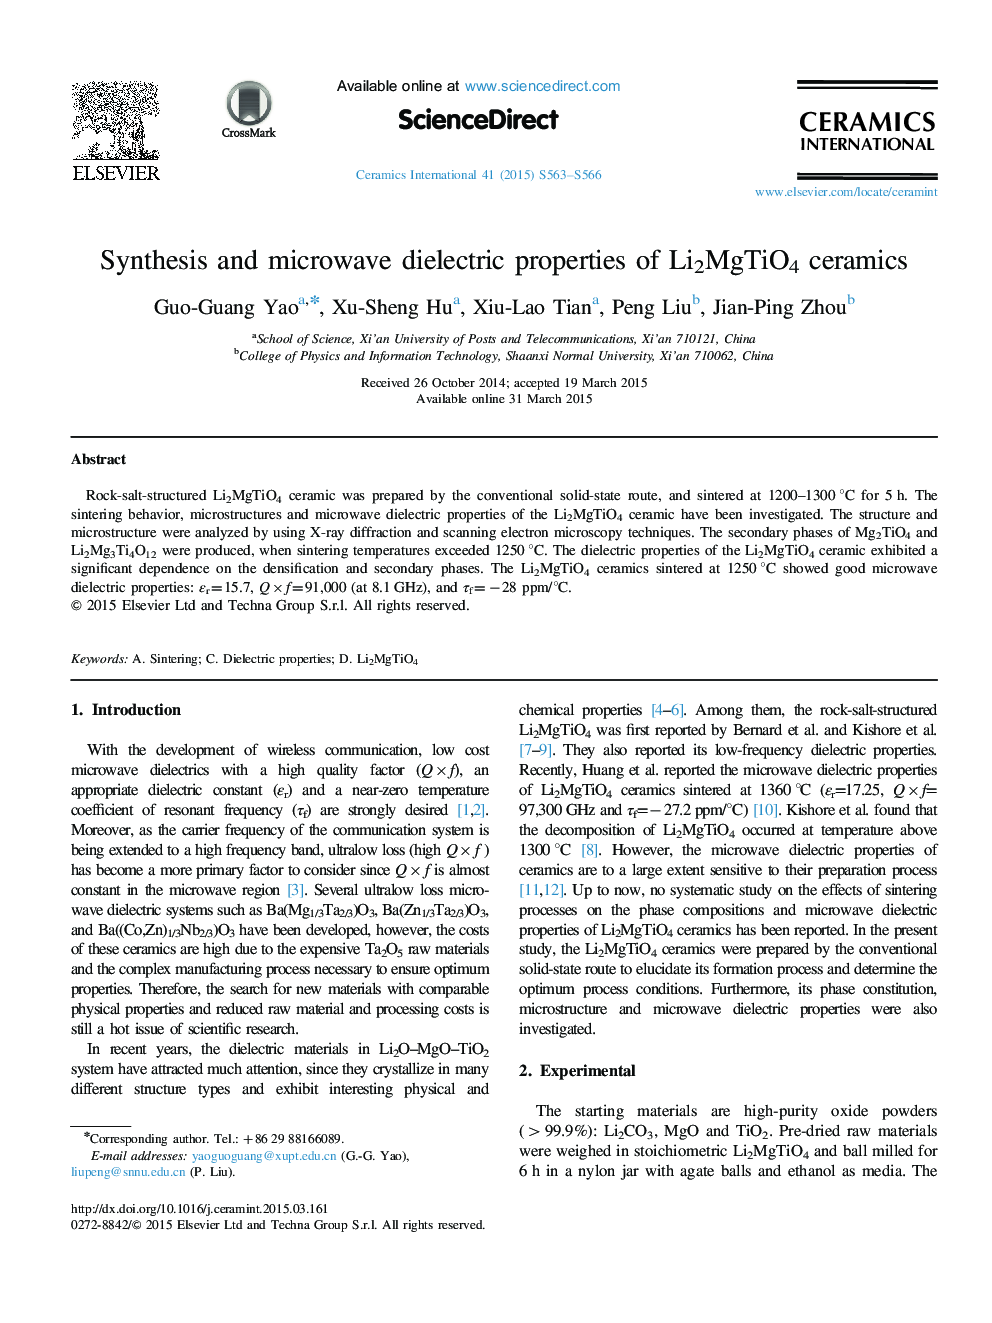 Synthesis and microwave dielectric properties of Li2MgTiO4 ceramics